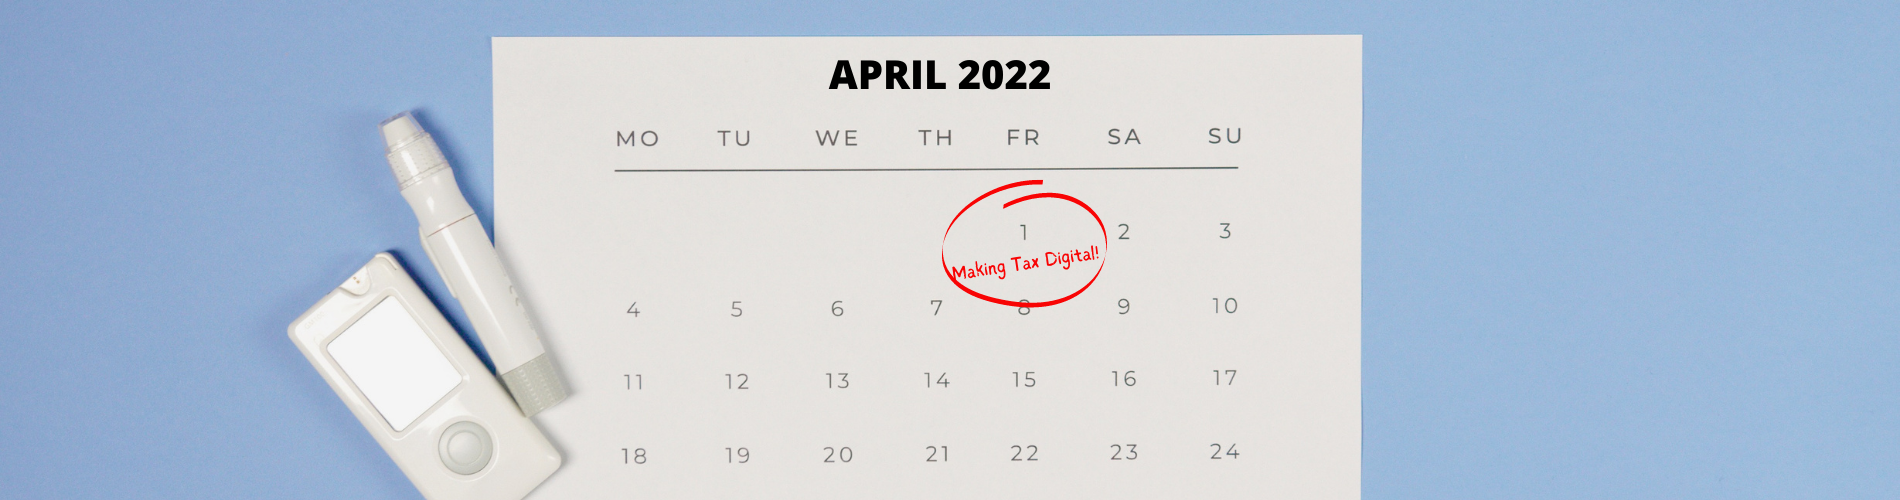 All VAT-registered businesses need to sign up for Making Tax Digital by April 1st 2022